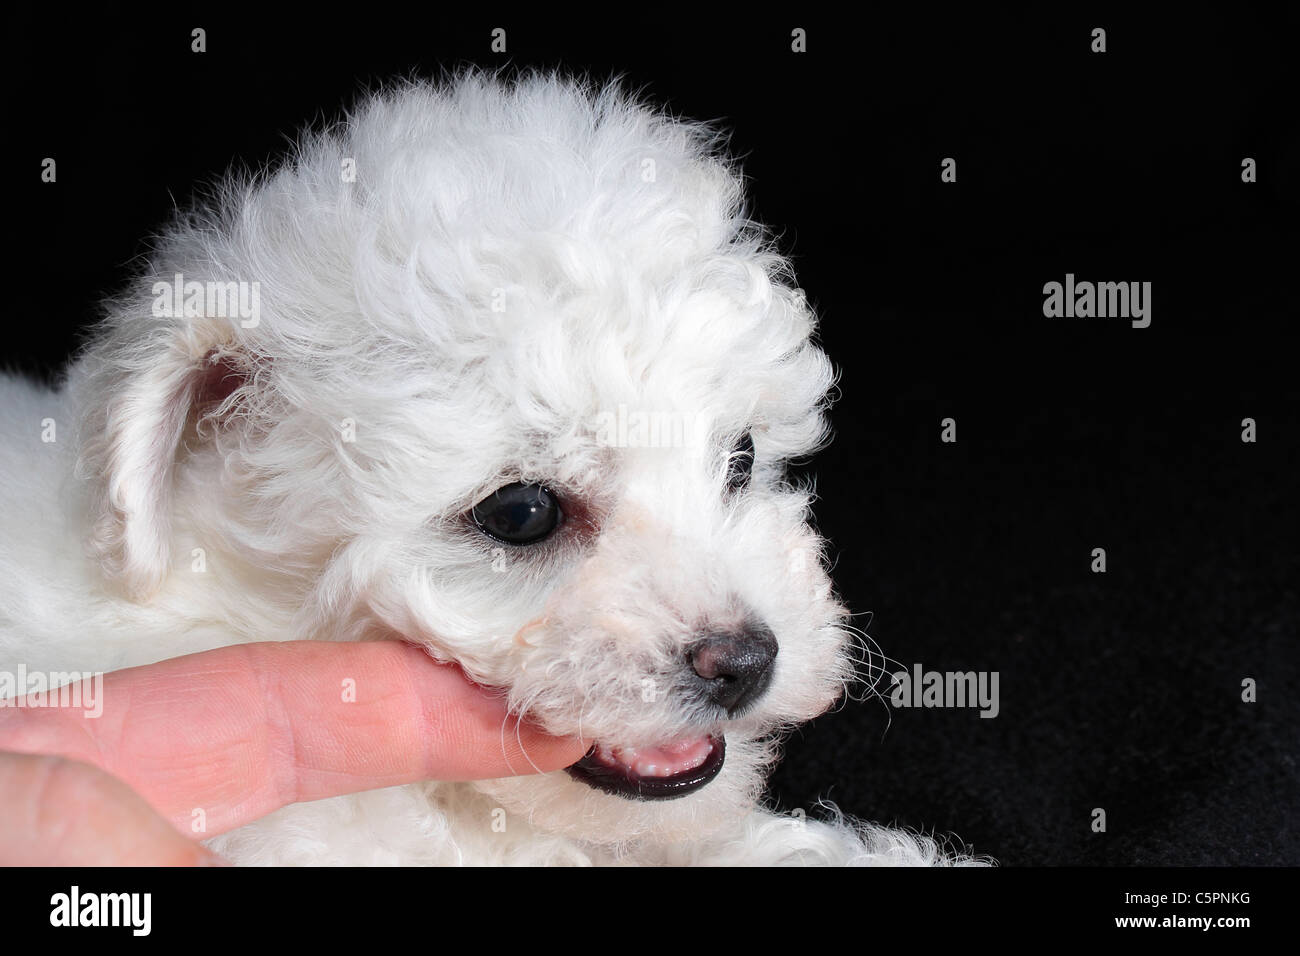 Six week old Bichon Frise Puppy chewing on a finger Stock Photo